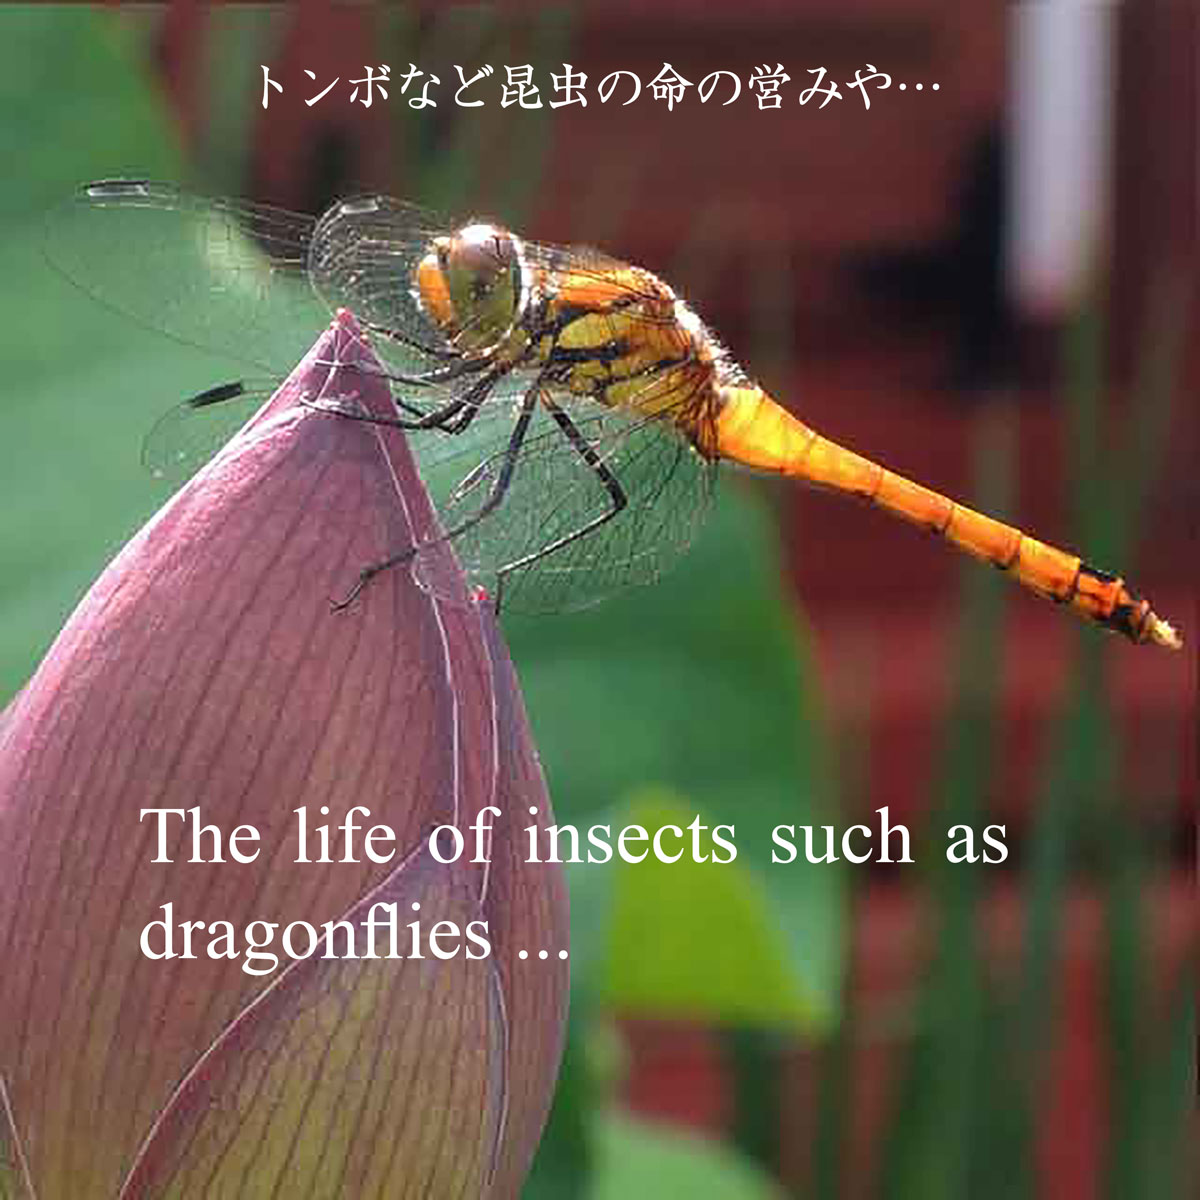 The life of insects such as dragonflies